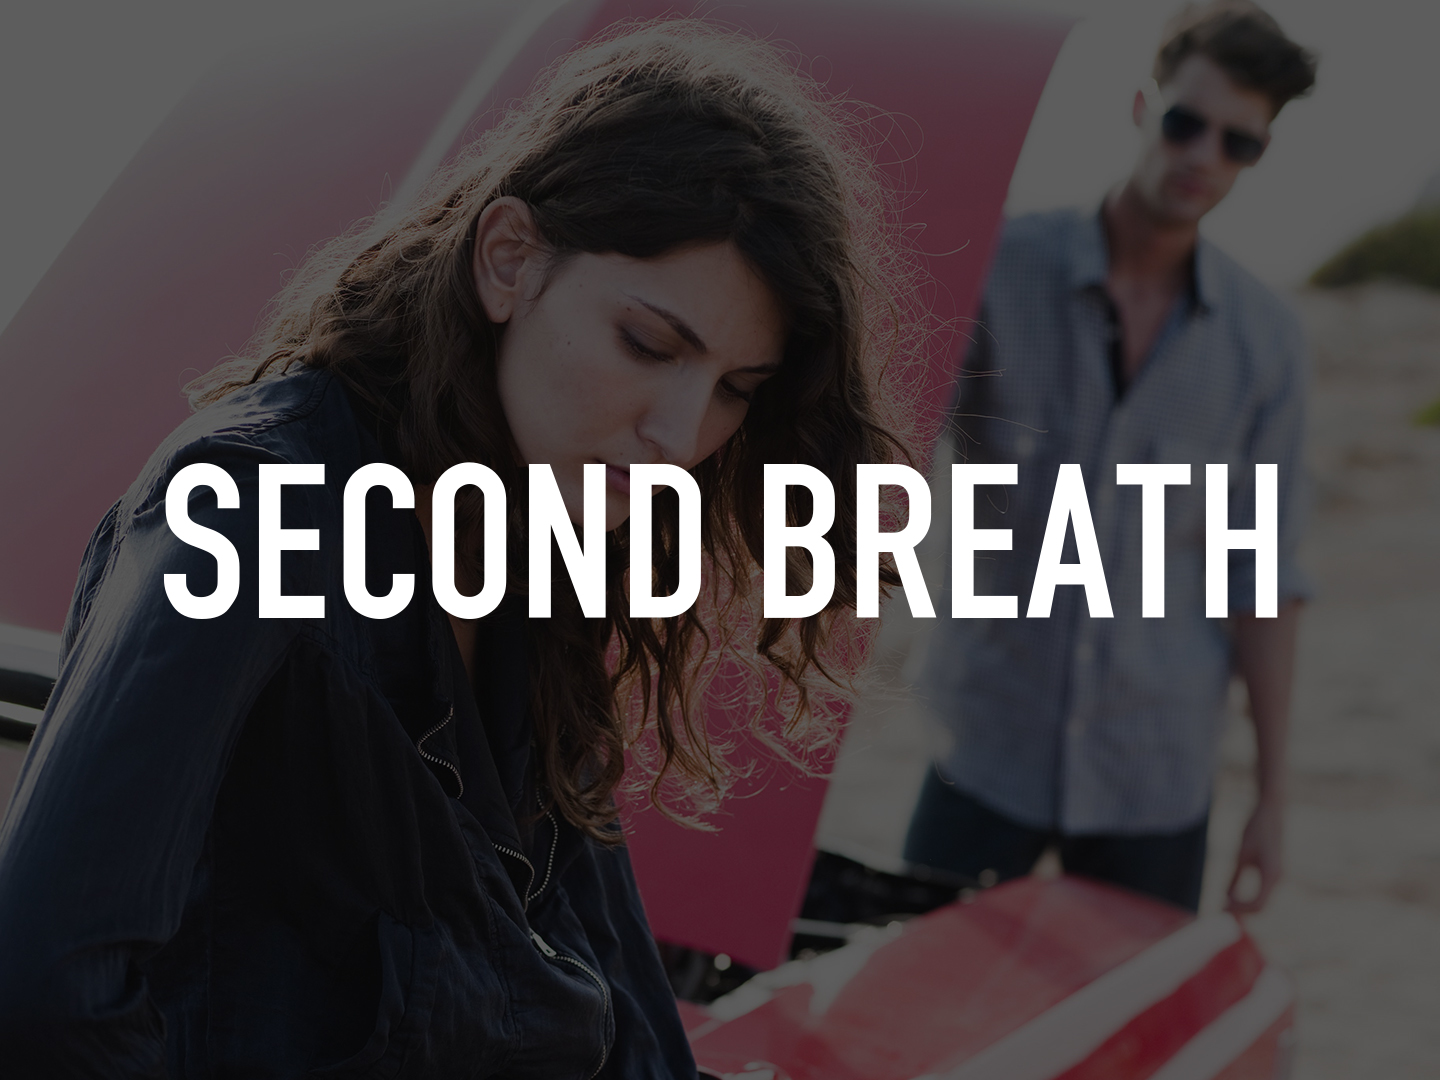 30-facts-about-the-movie-second-breath